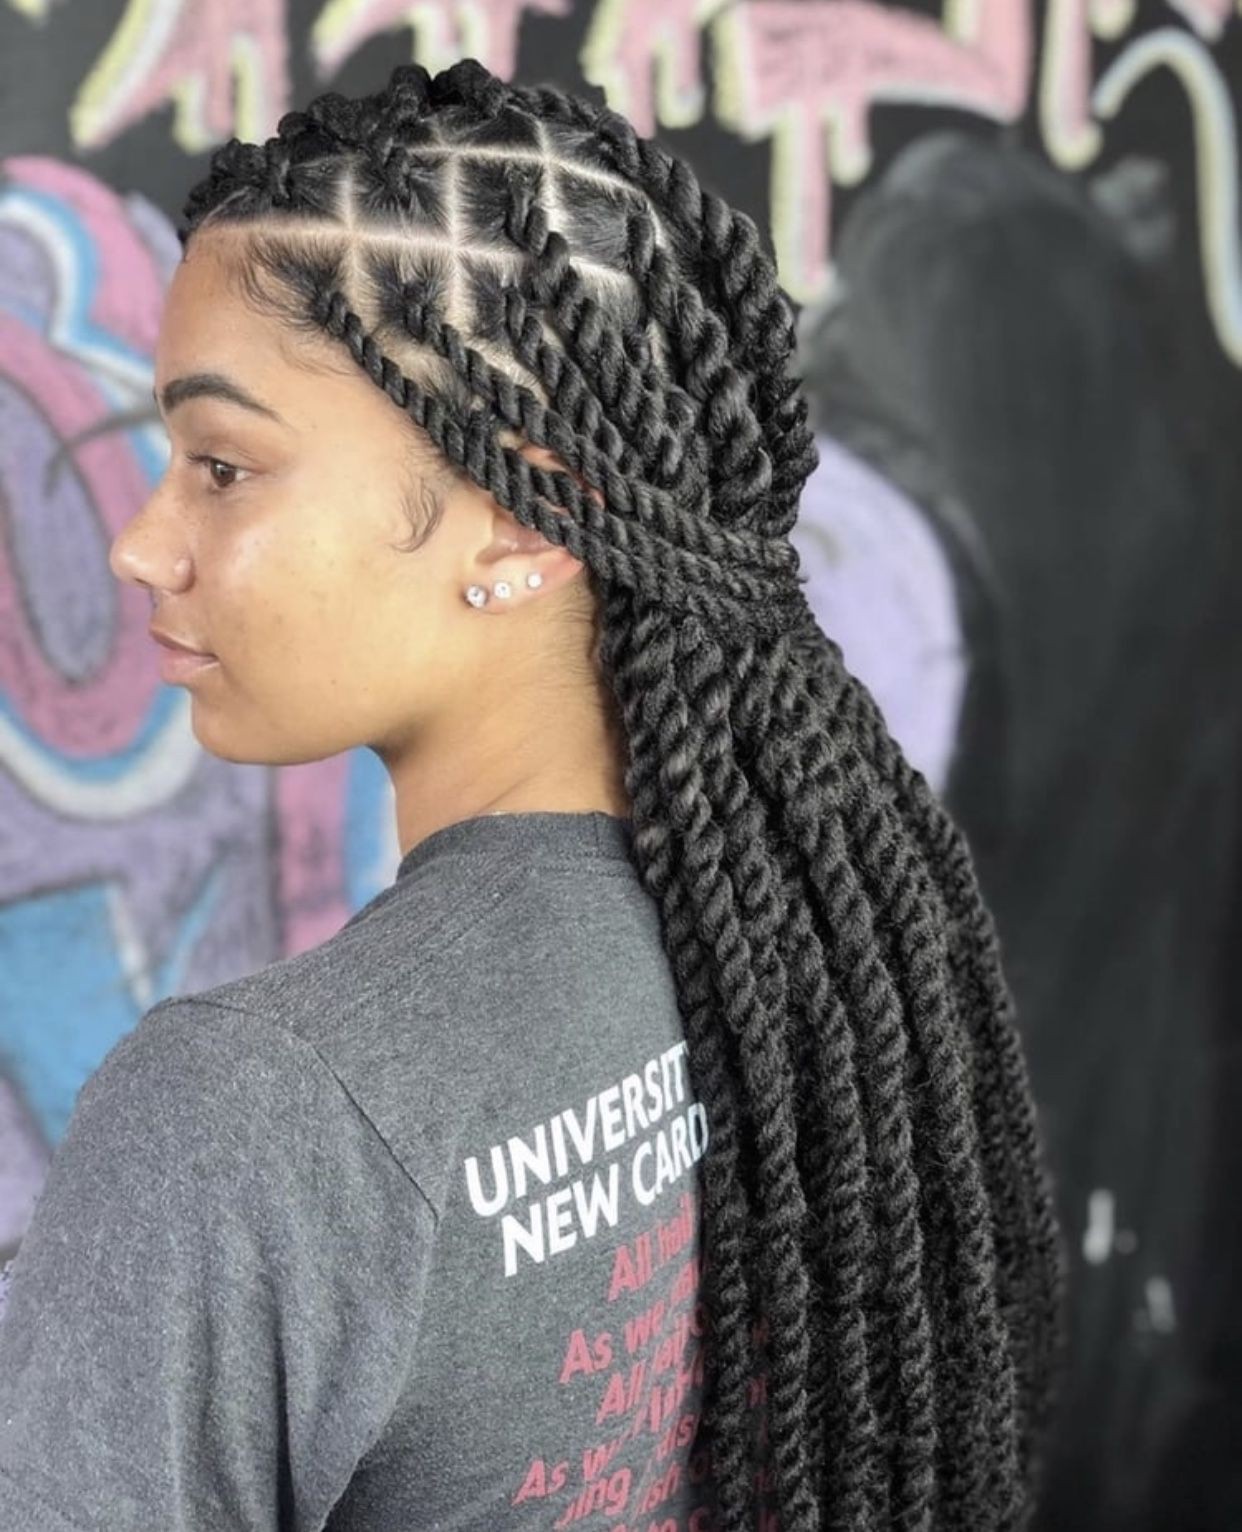 Hairstyles for black girls, hair twists, box braids, black hair, long hair,  bob cut | Braided Hairstyles For Black Women | Black hair, Bob cut, Box  braids